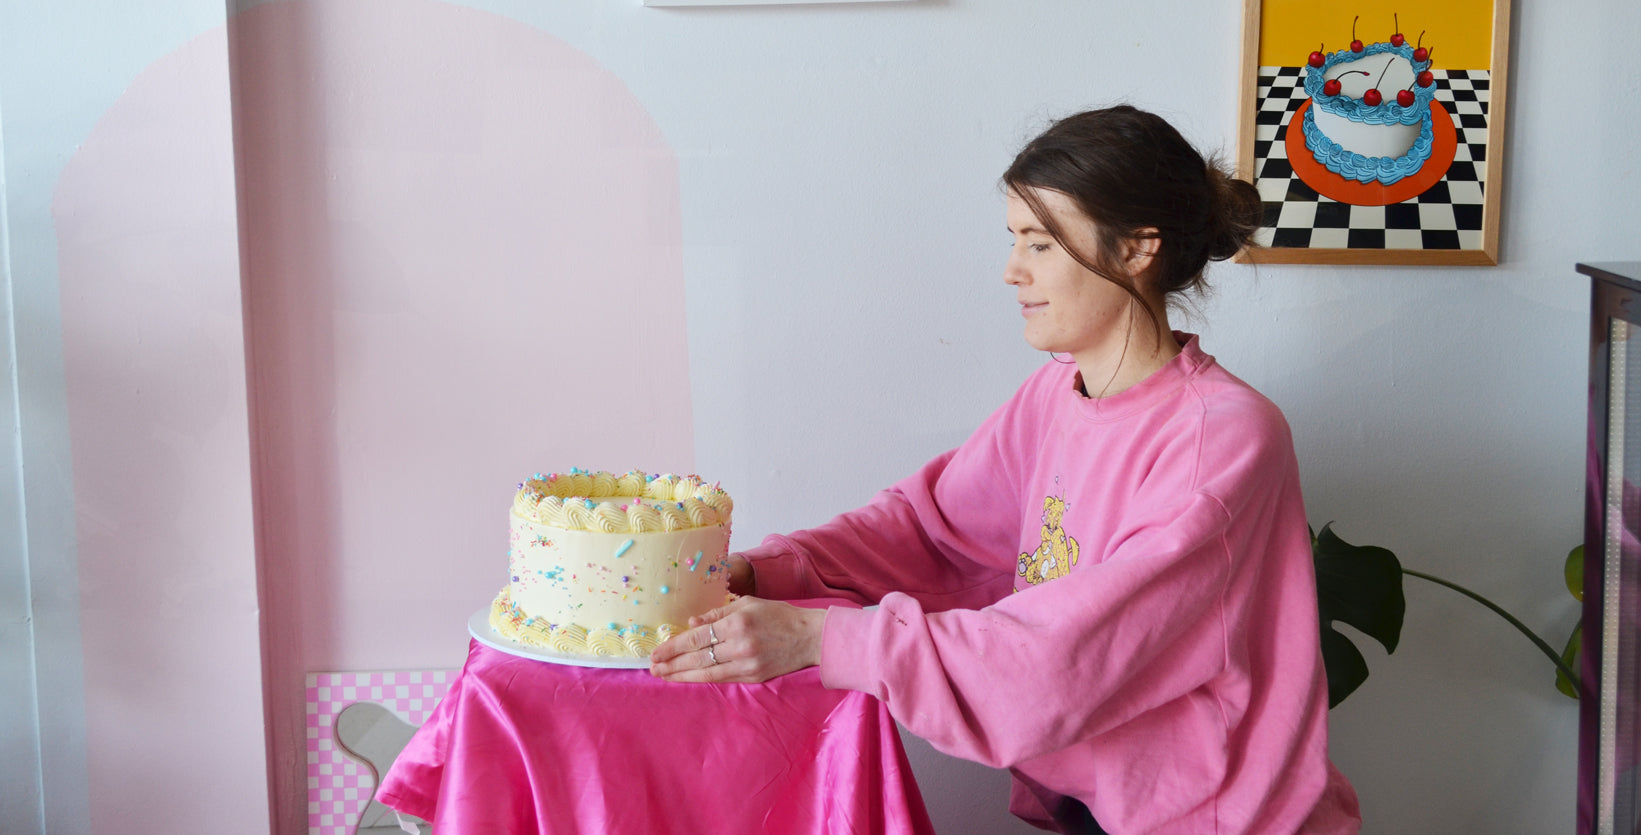 Matilda Chambers sits in front of a cream and sprinkle cake wearing a pink jumper.